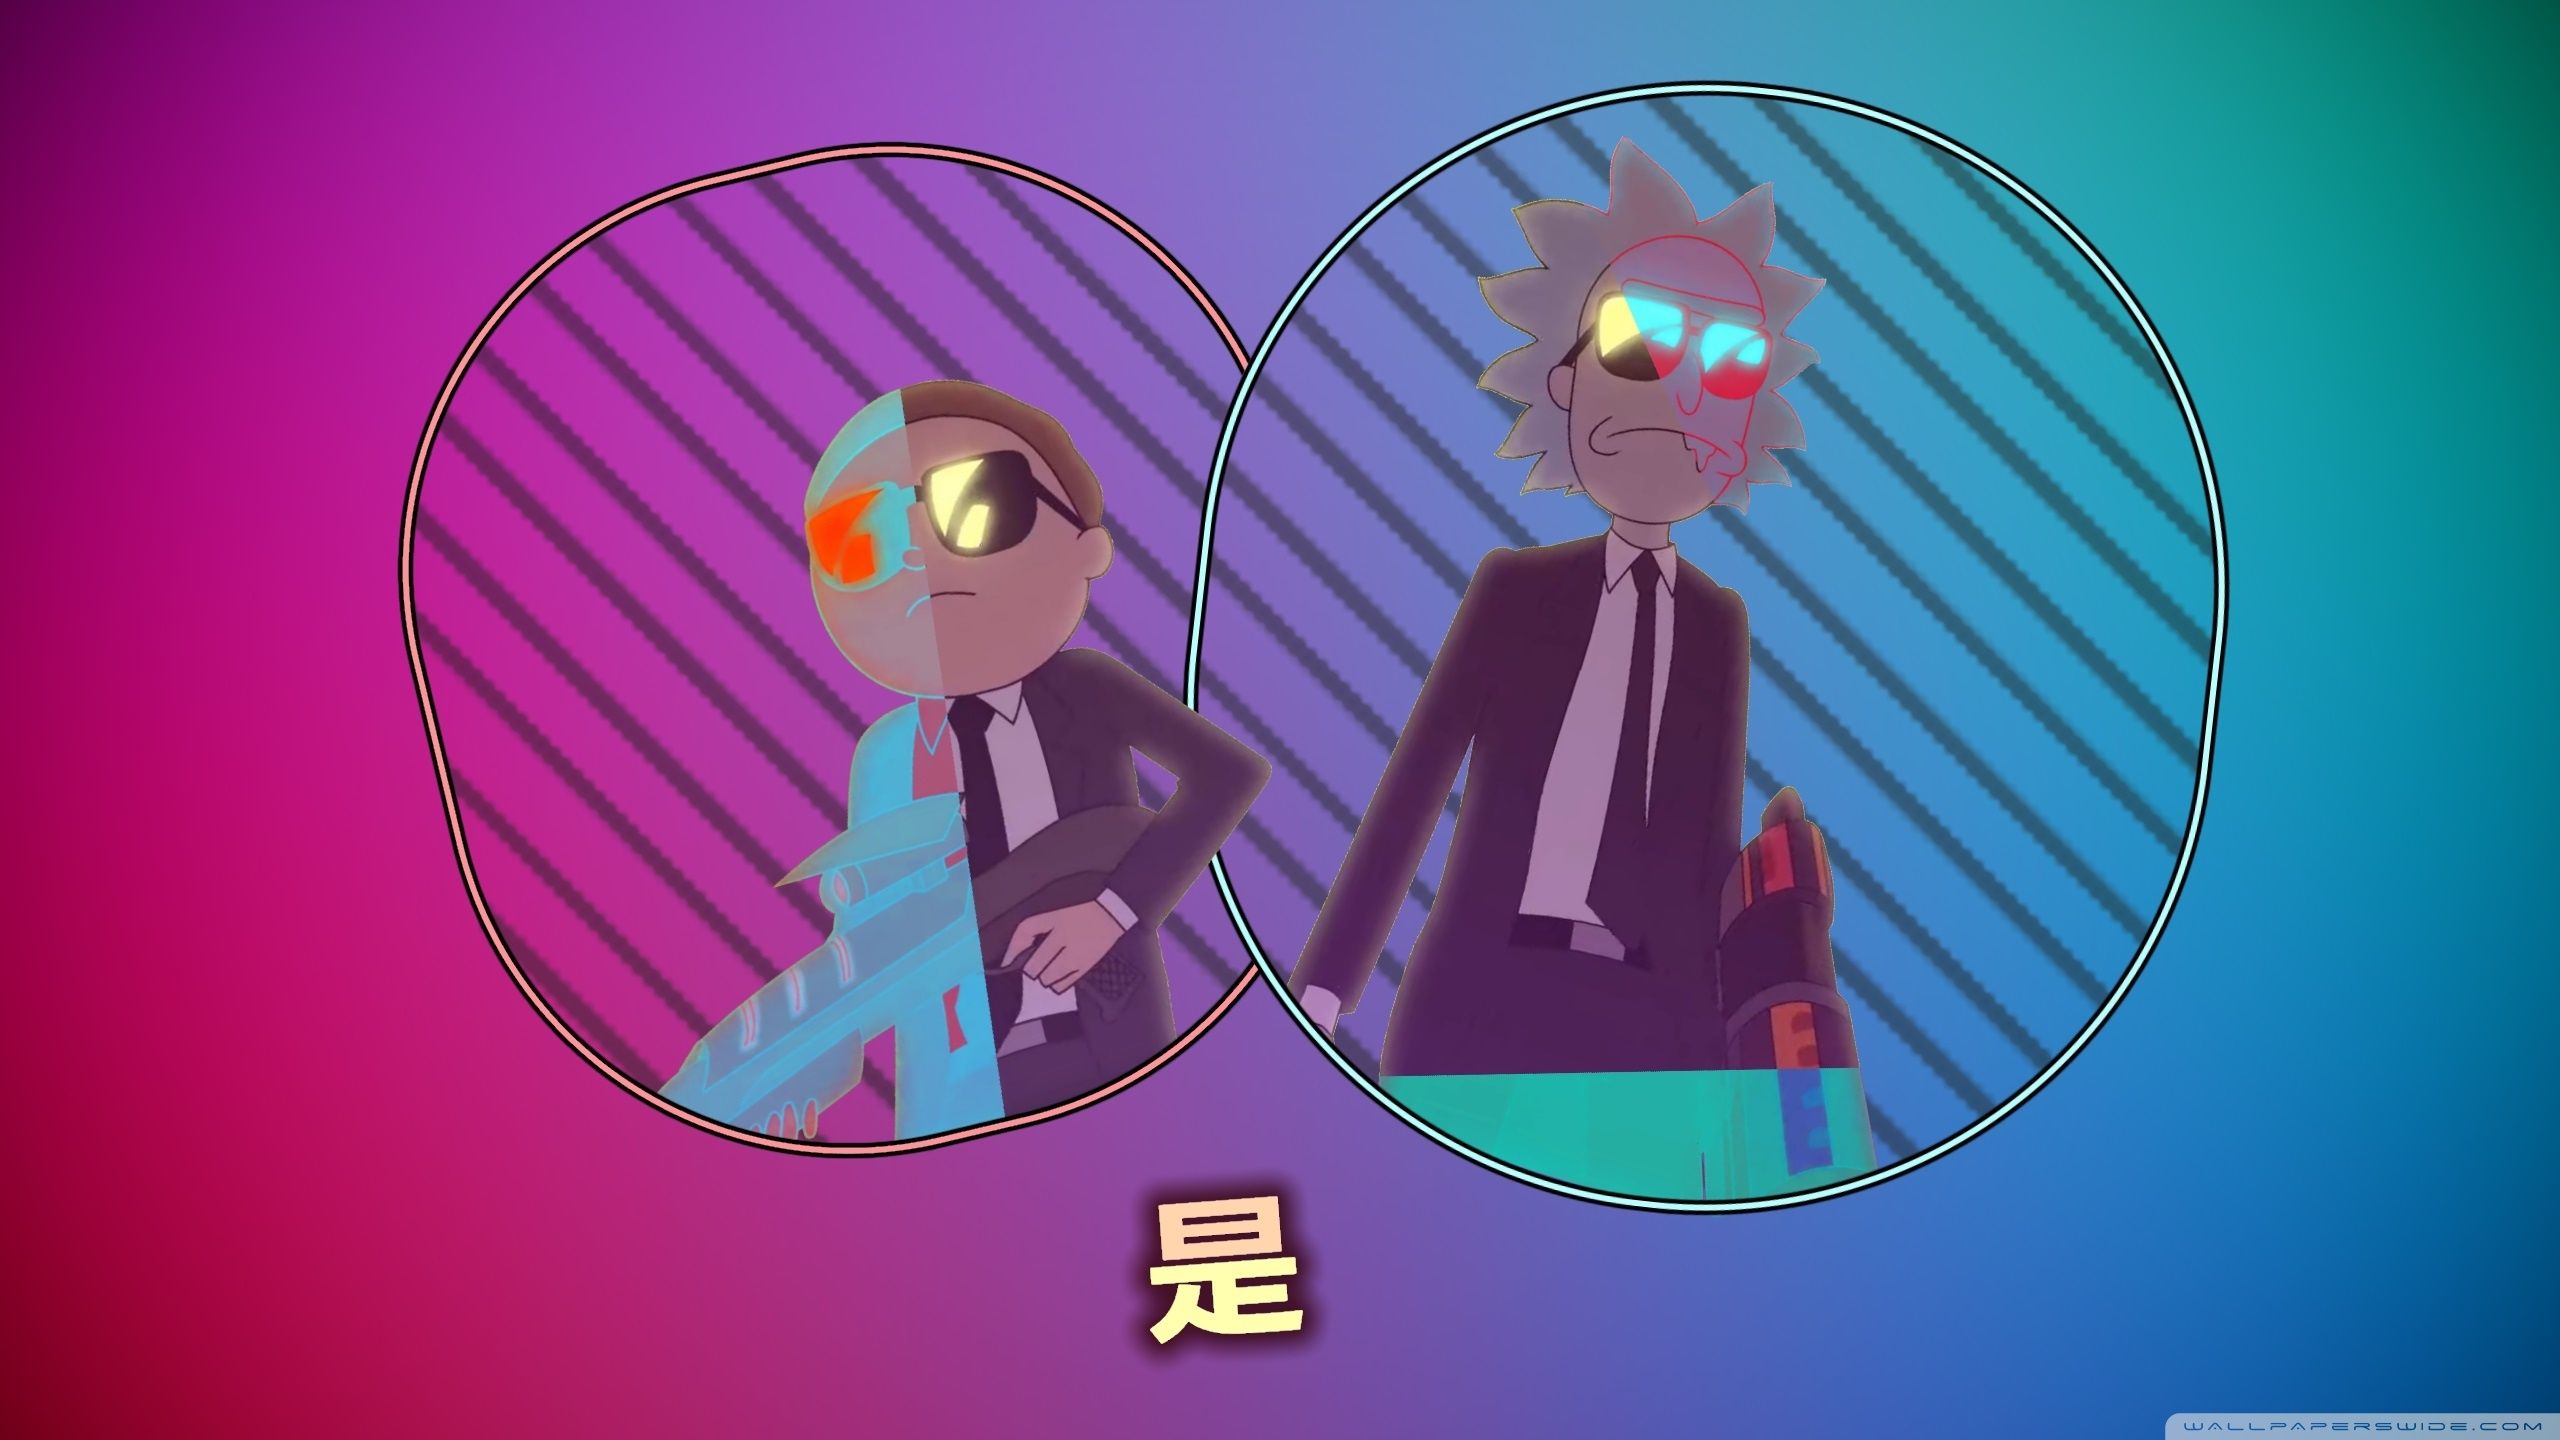 Rick and morty wallpaper 4k 1920x1080 for android - Rick and Morty